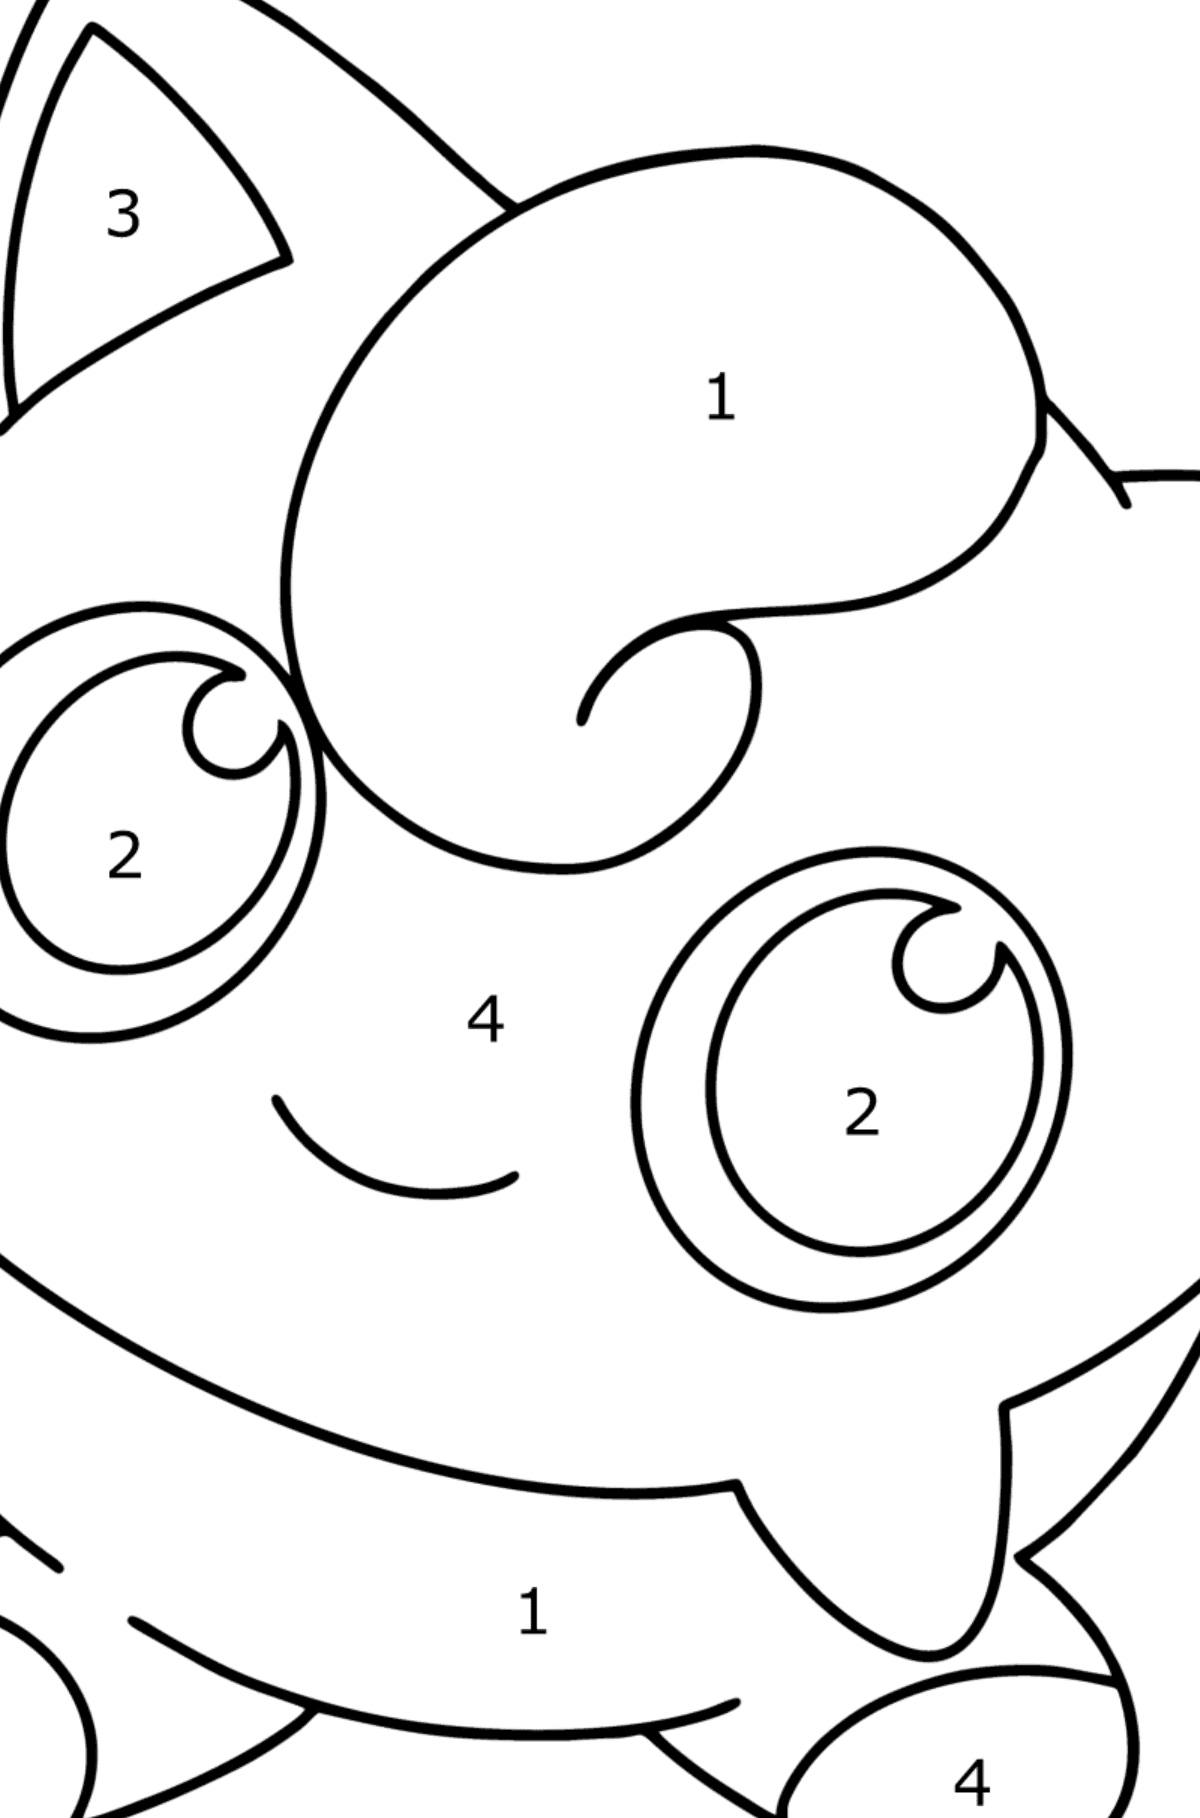 Coloring page Pokémon Go Jigglypuff - Coloring by Numbers for Kids